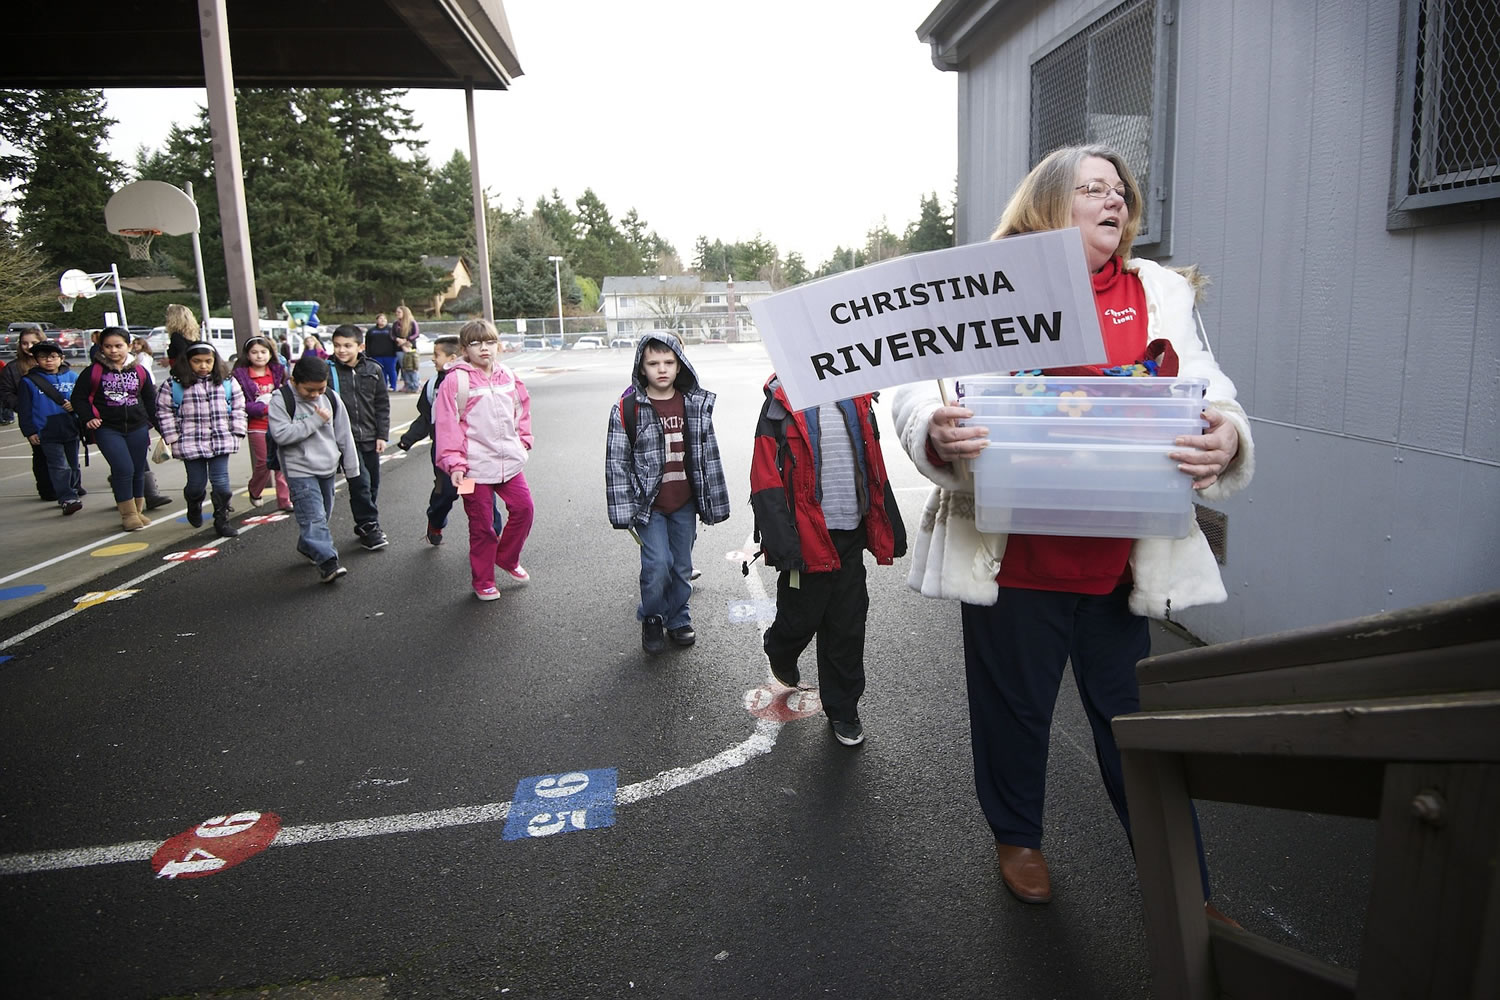 Audrey Christina, a third grade teacher for Crestline Elementary School, right, leads her third grade class to a portable classroom at Riverview Elementary on Thursday.